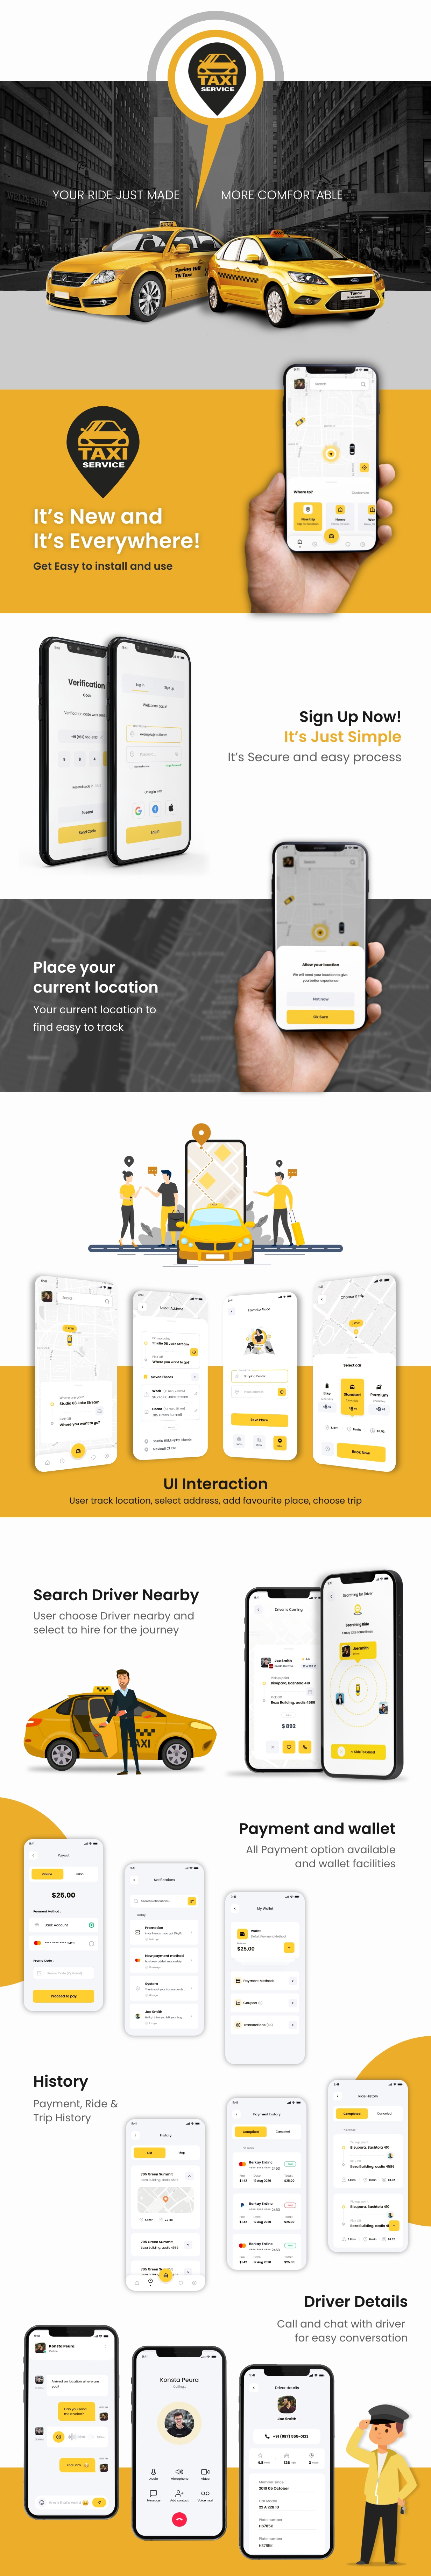 Flutter app - Taxi-booking app customer side with search, chatting, notifications & history features - 1